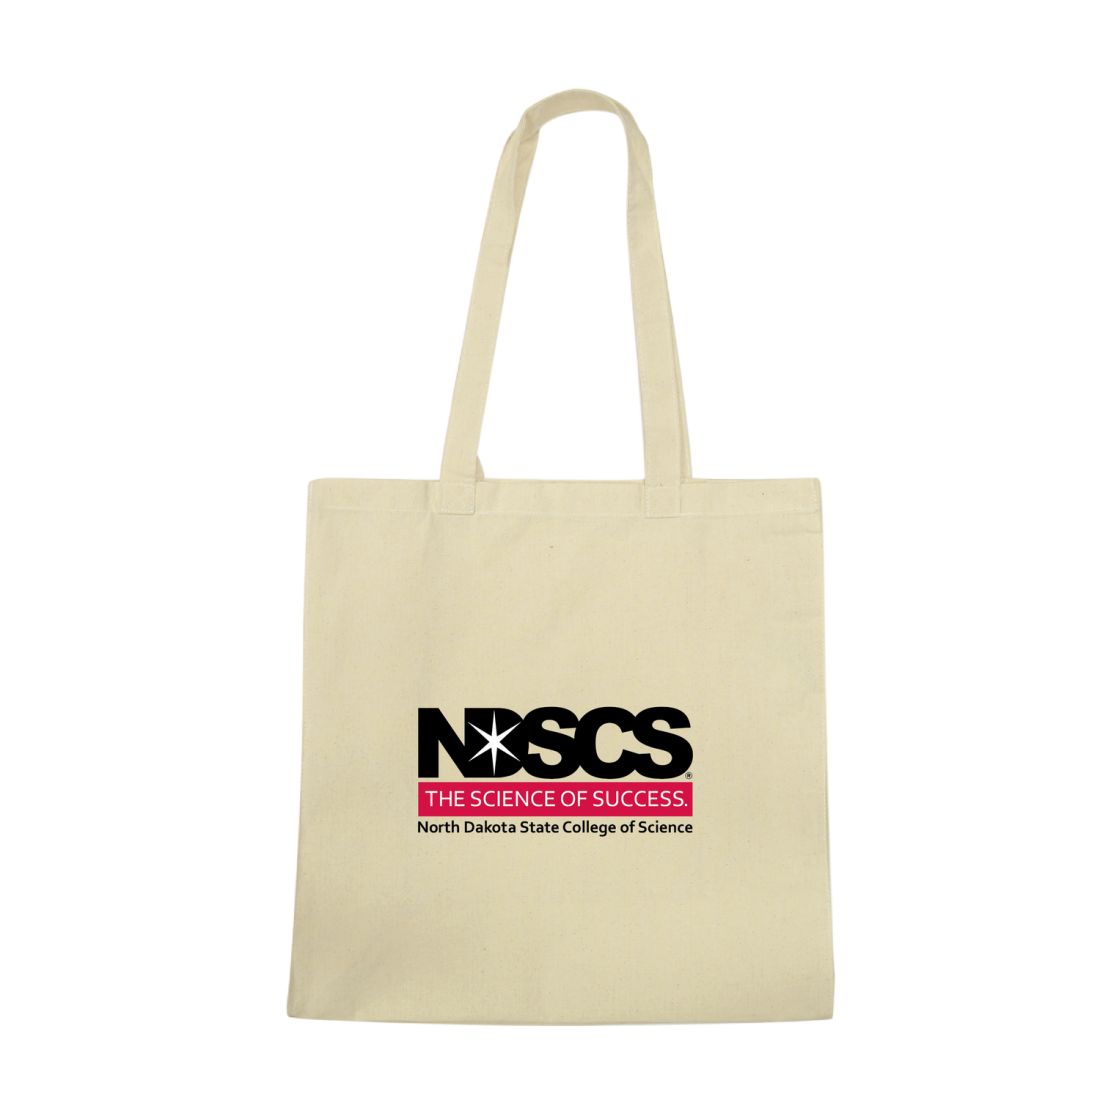 NDSCS North Dakota State College of Science Wildcats Institutional Tote Bag